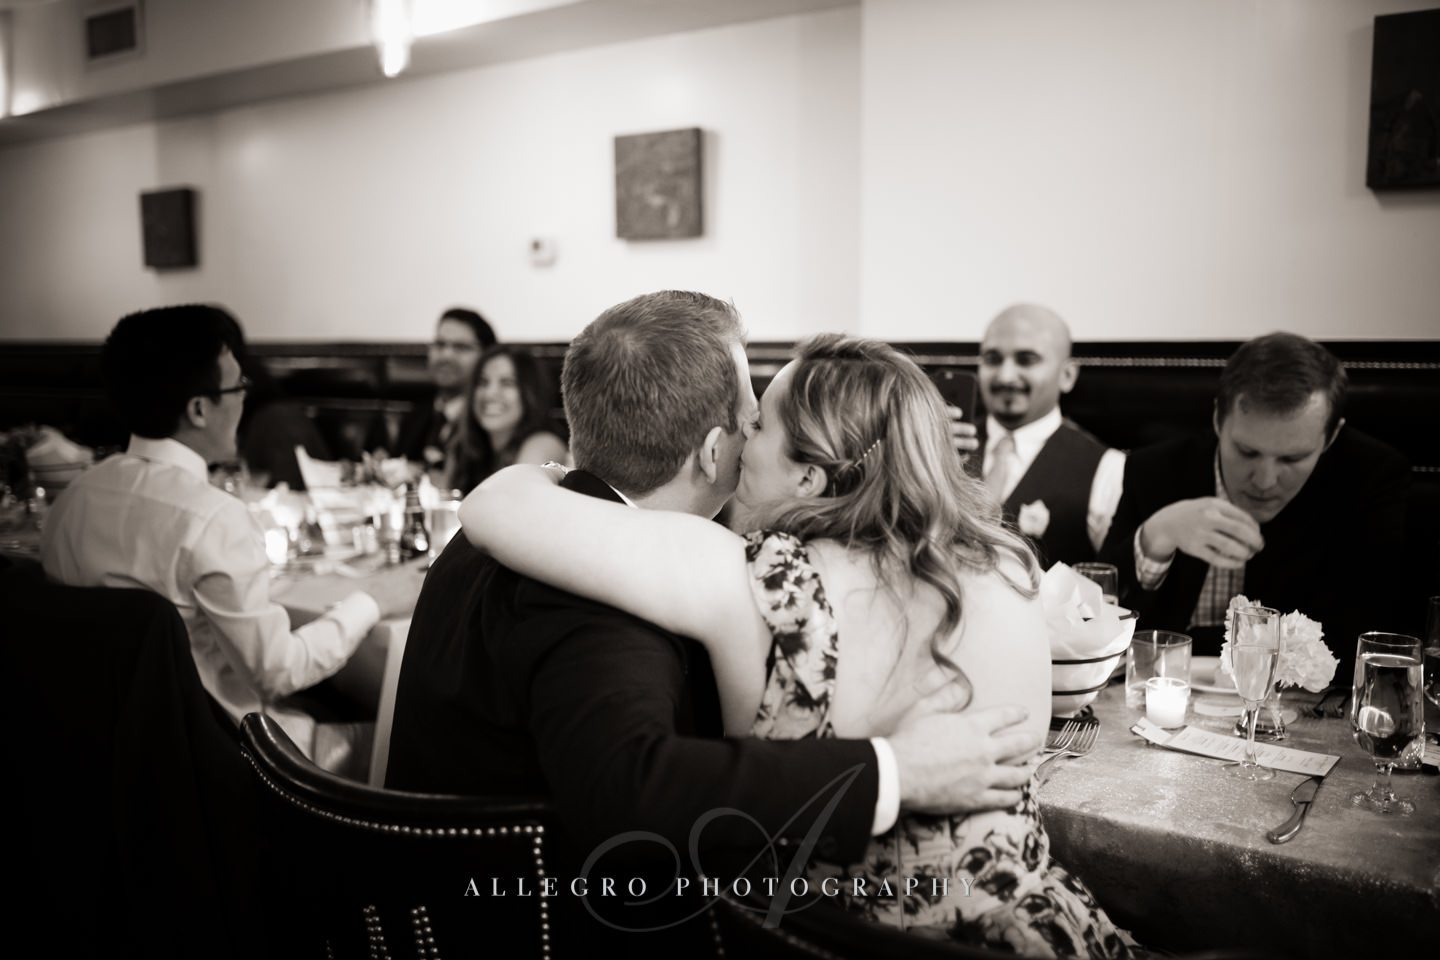 guest having fun - photo by Allegro Photography